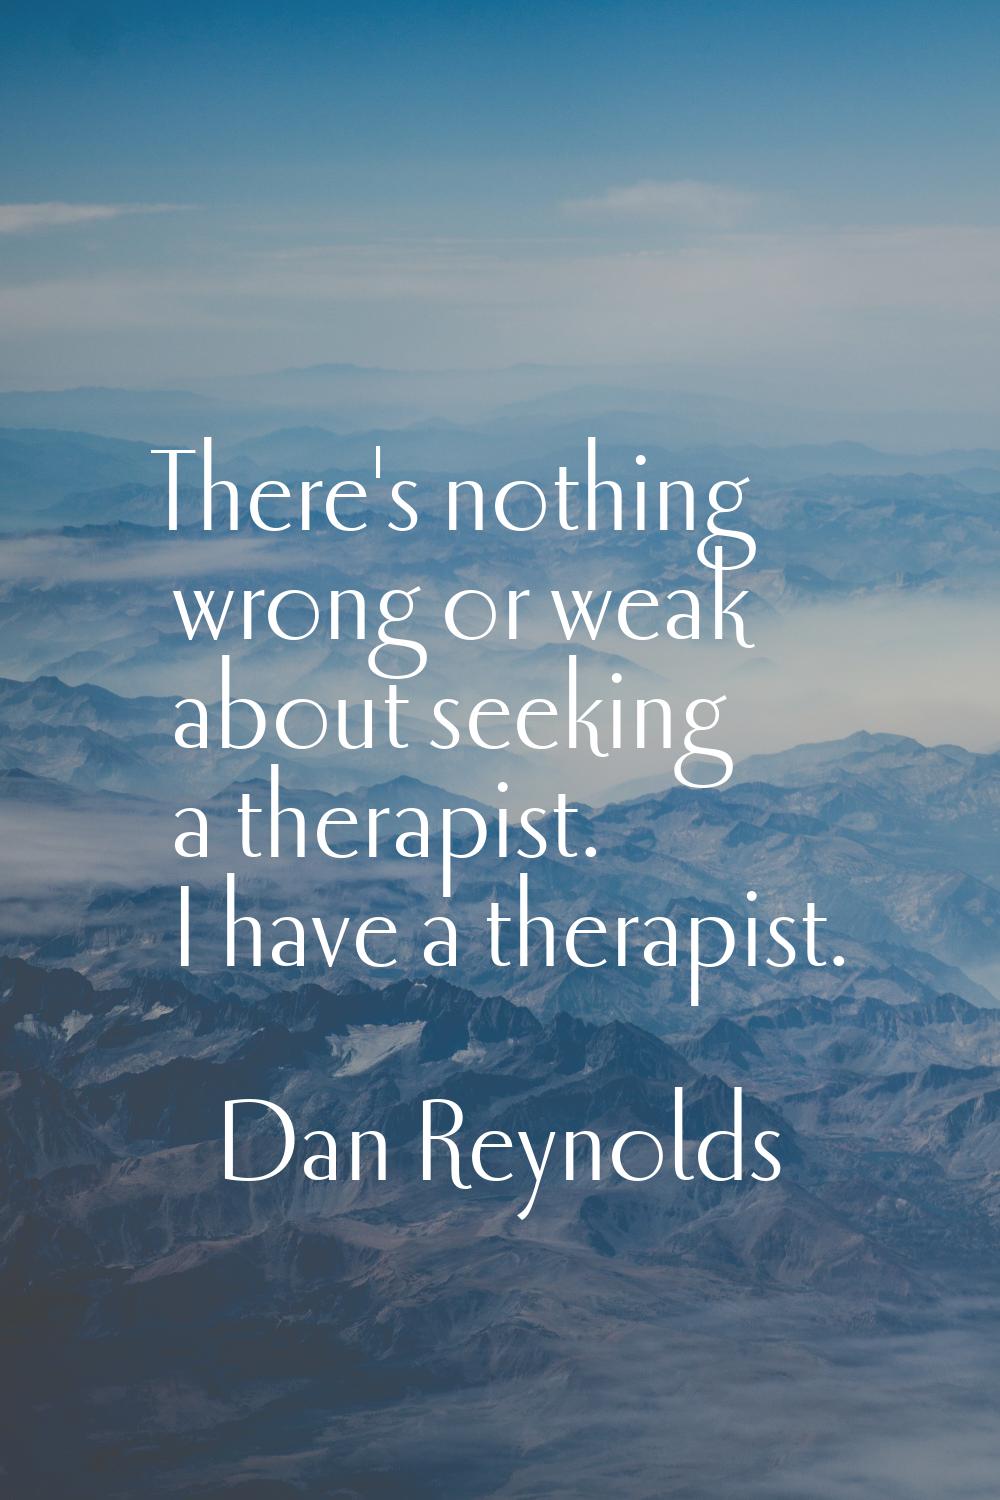 There's nothing wrong or weak about seeking a therapist. I have a therapist.